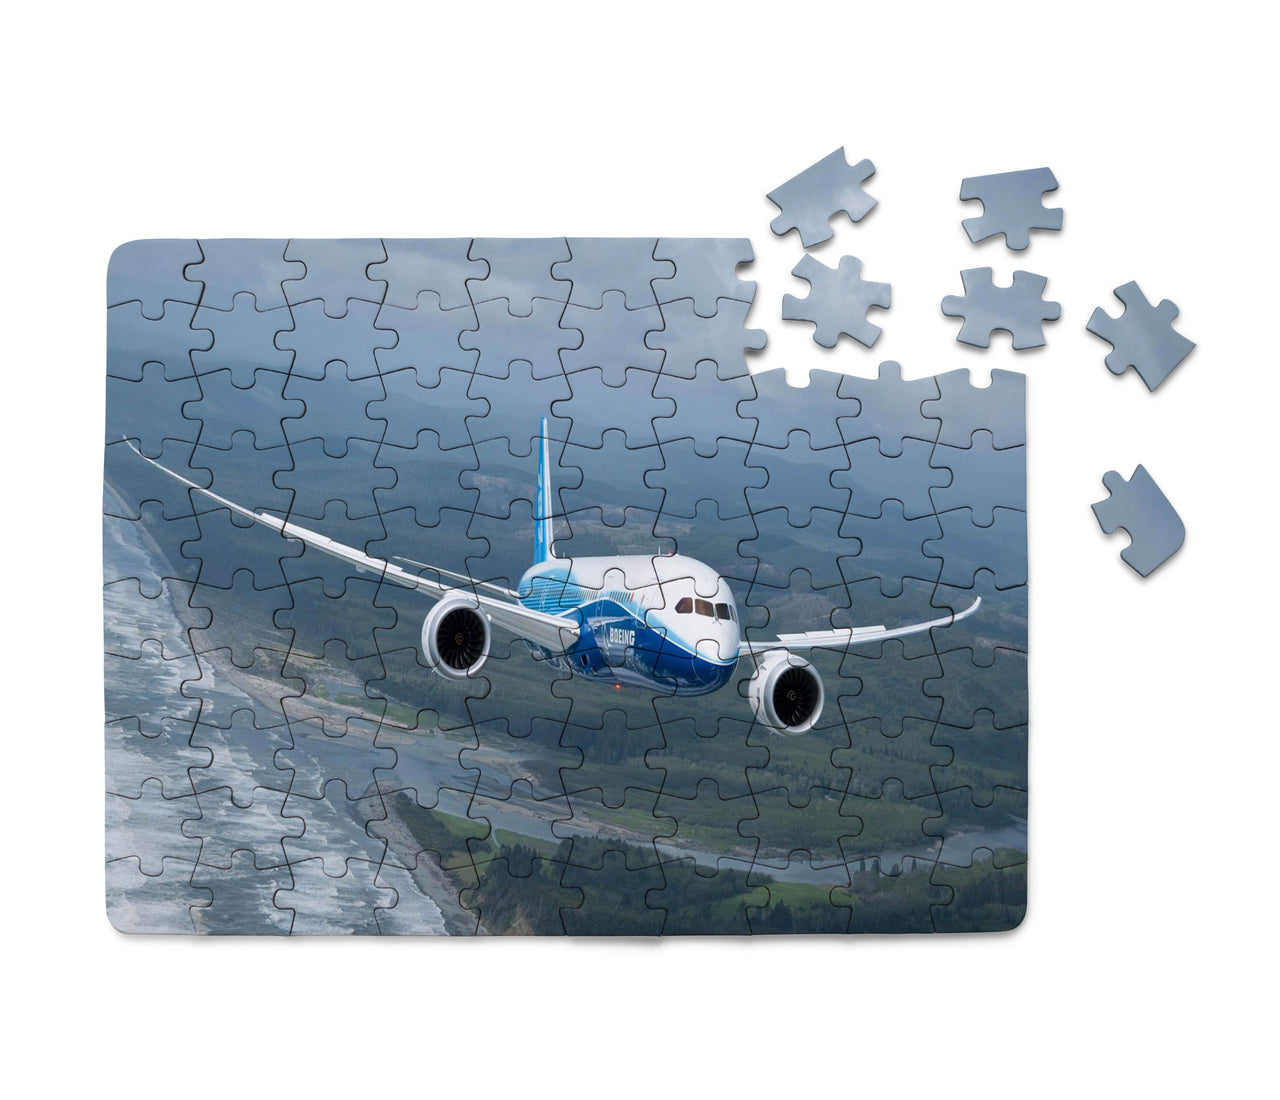 Cruising Boeing 787 Printed Puzzles Aviation Shop 